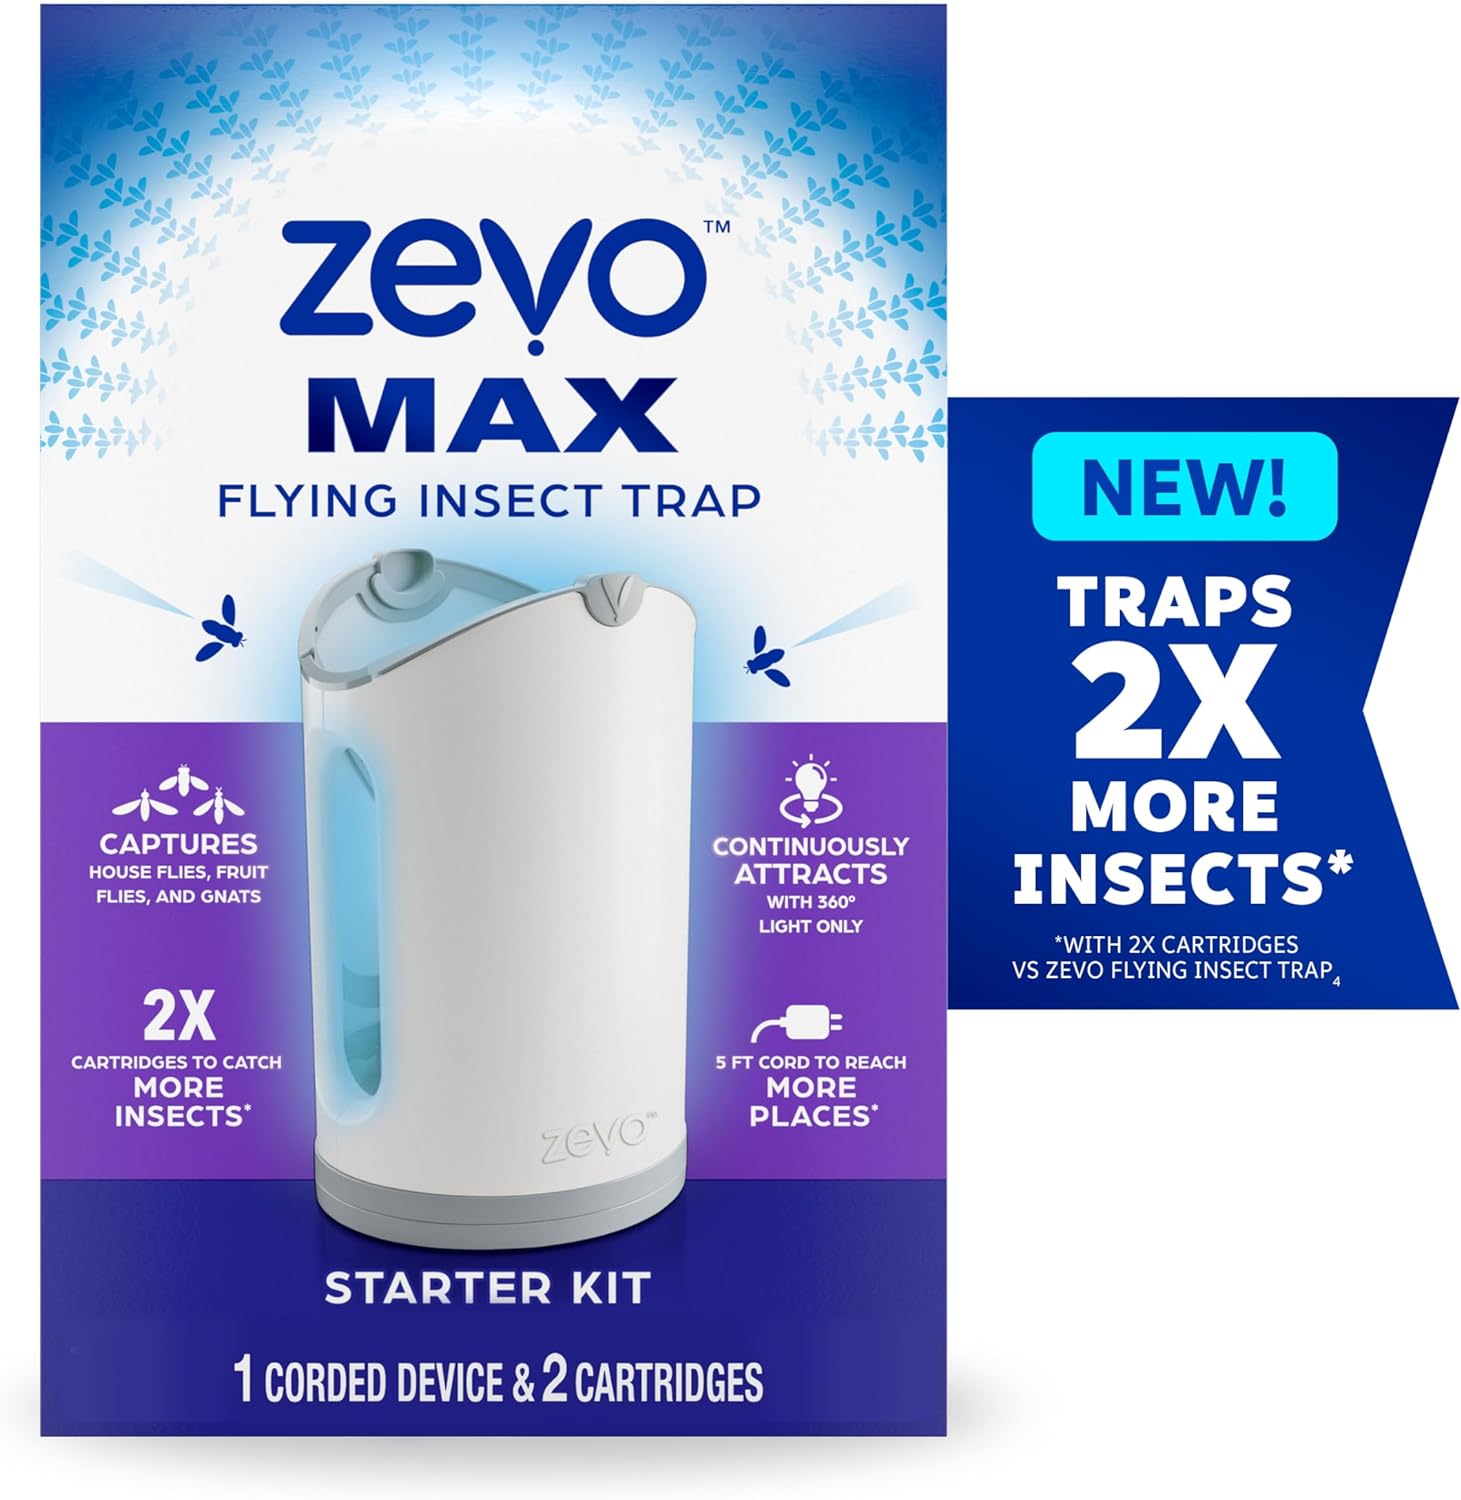 The image shows the packaging for the Zevo Max Flying Insect Trap Starter Kit. The box indicates it includes one corded device and two cartridges. The label highlights that it captures house flies, fruit flies, and gnats without vinegar, and traps twice as many insects.